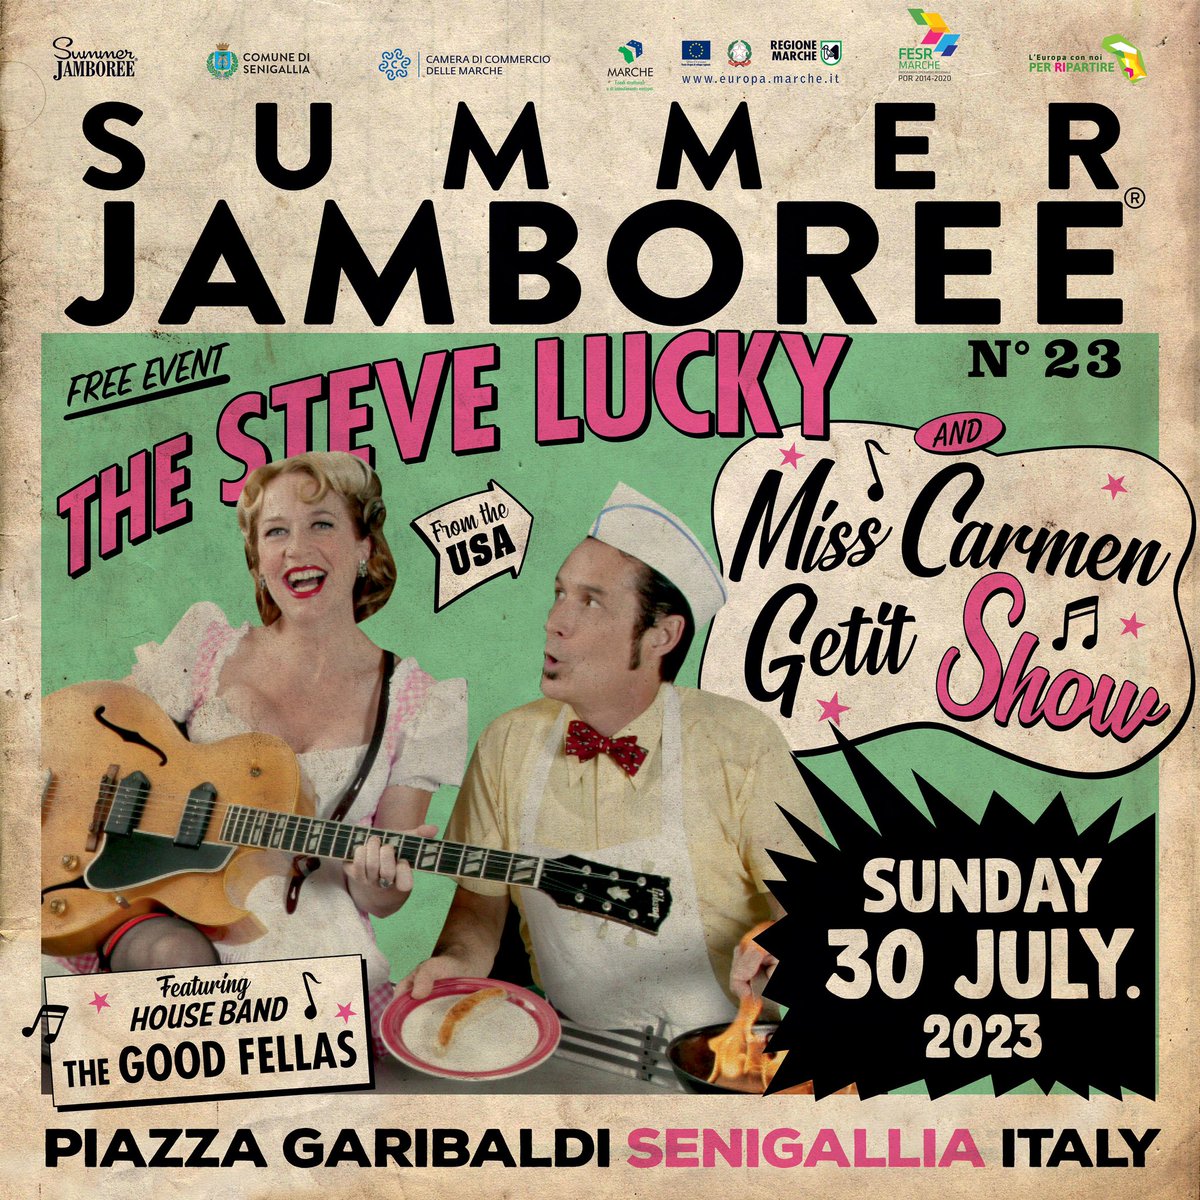 Thrilled to perform @ Summer Jamboree festival in Senigallia Italy with Italy’s Goodfellas!  Incredible festival - can’t wait! #50sRock #jump #freelivemusic